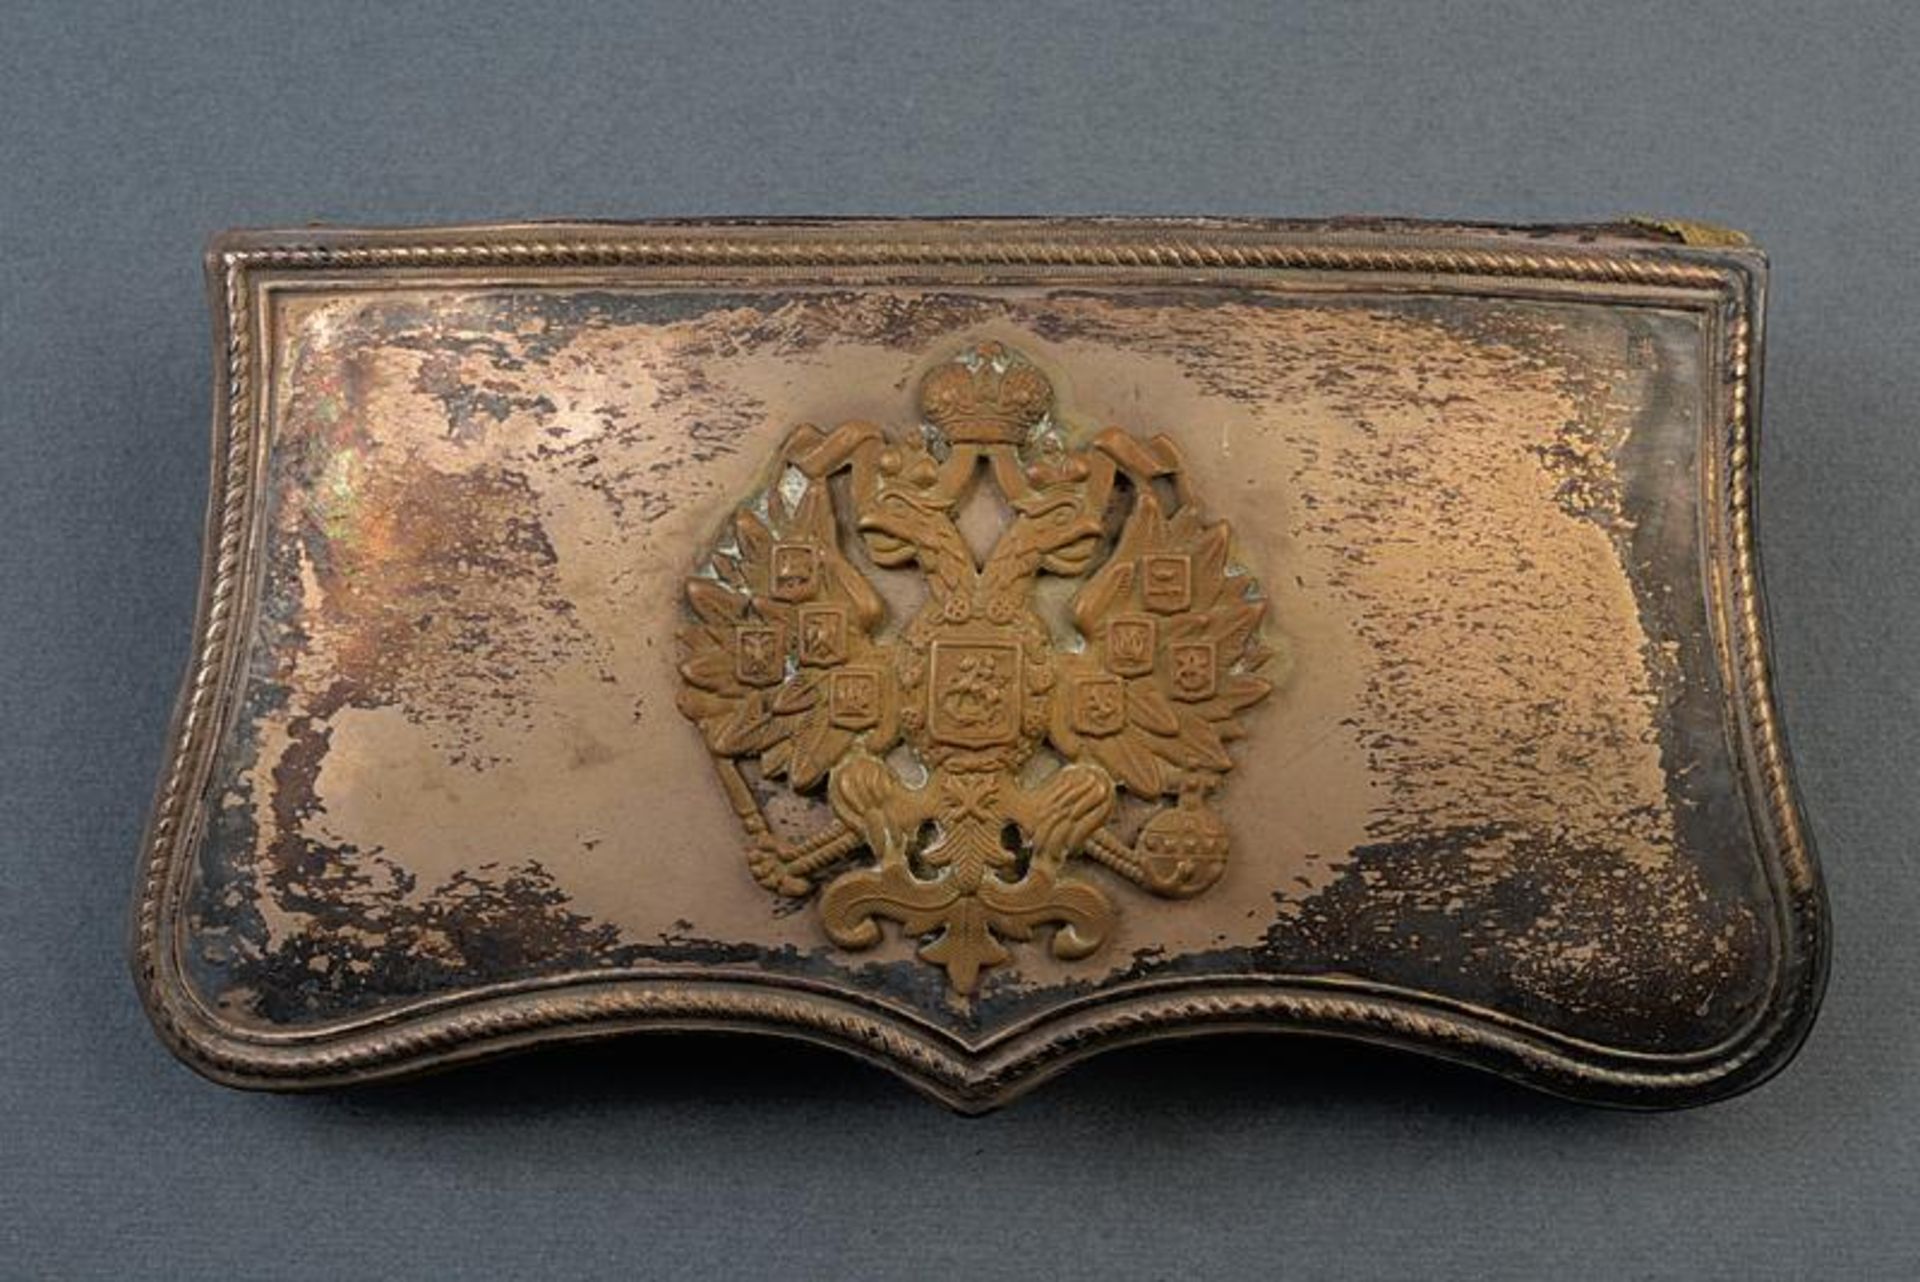 A cavalry officer's cartridge box